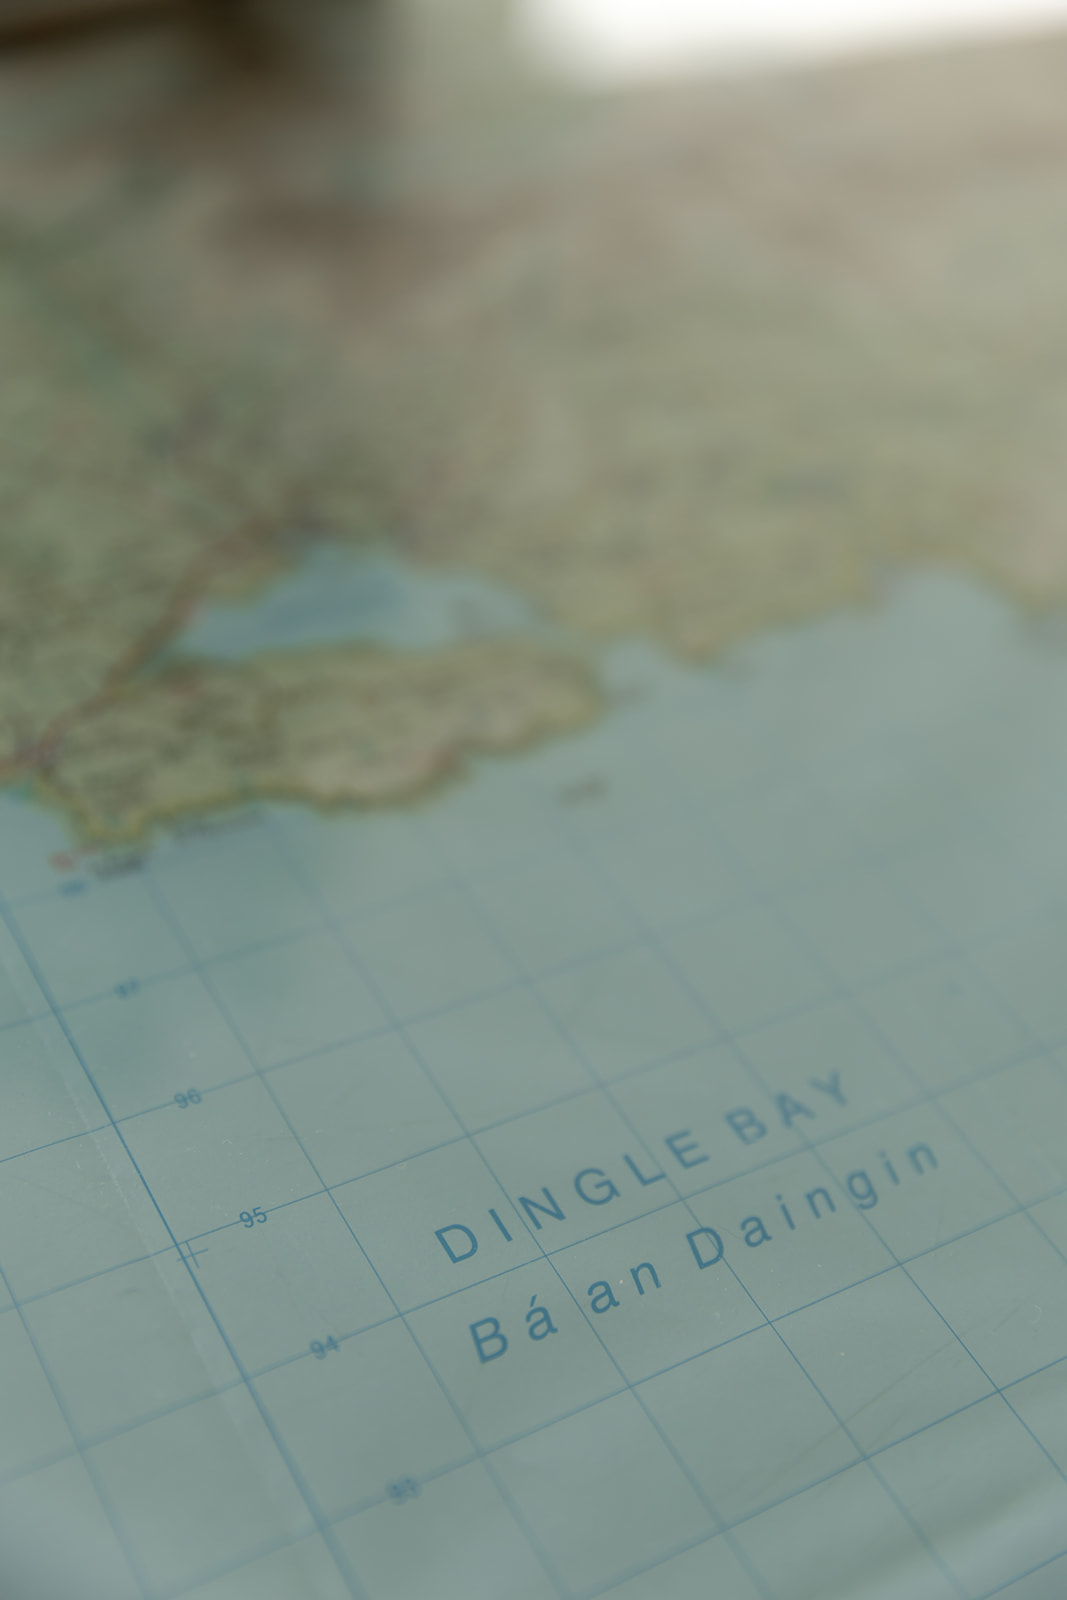 Excerpt of a map showing the dingle bay